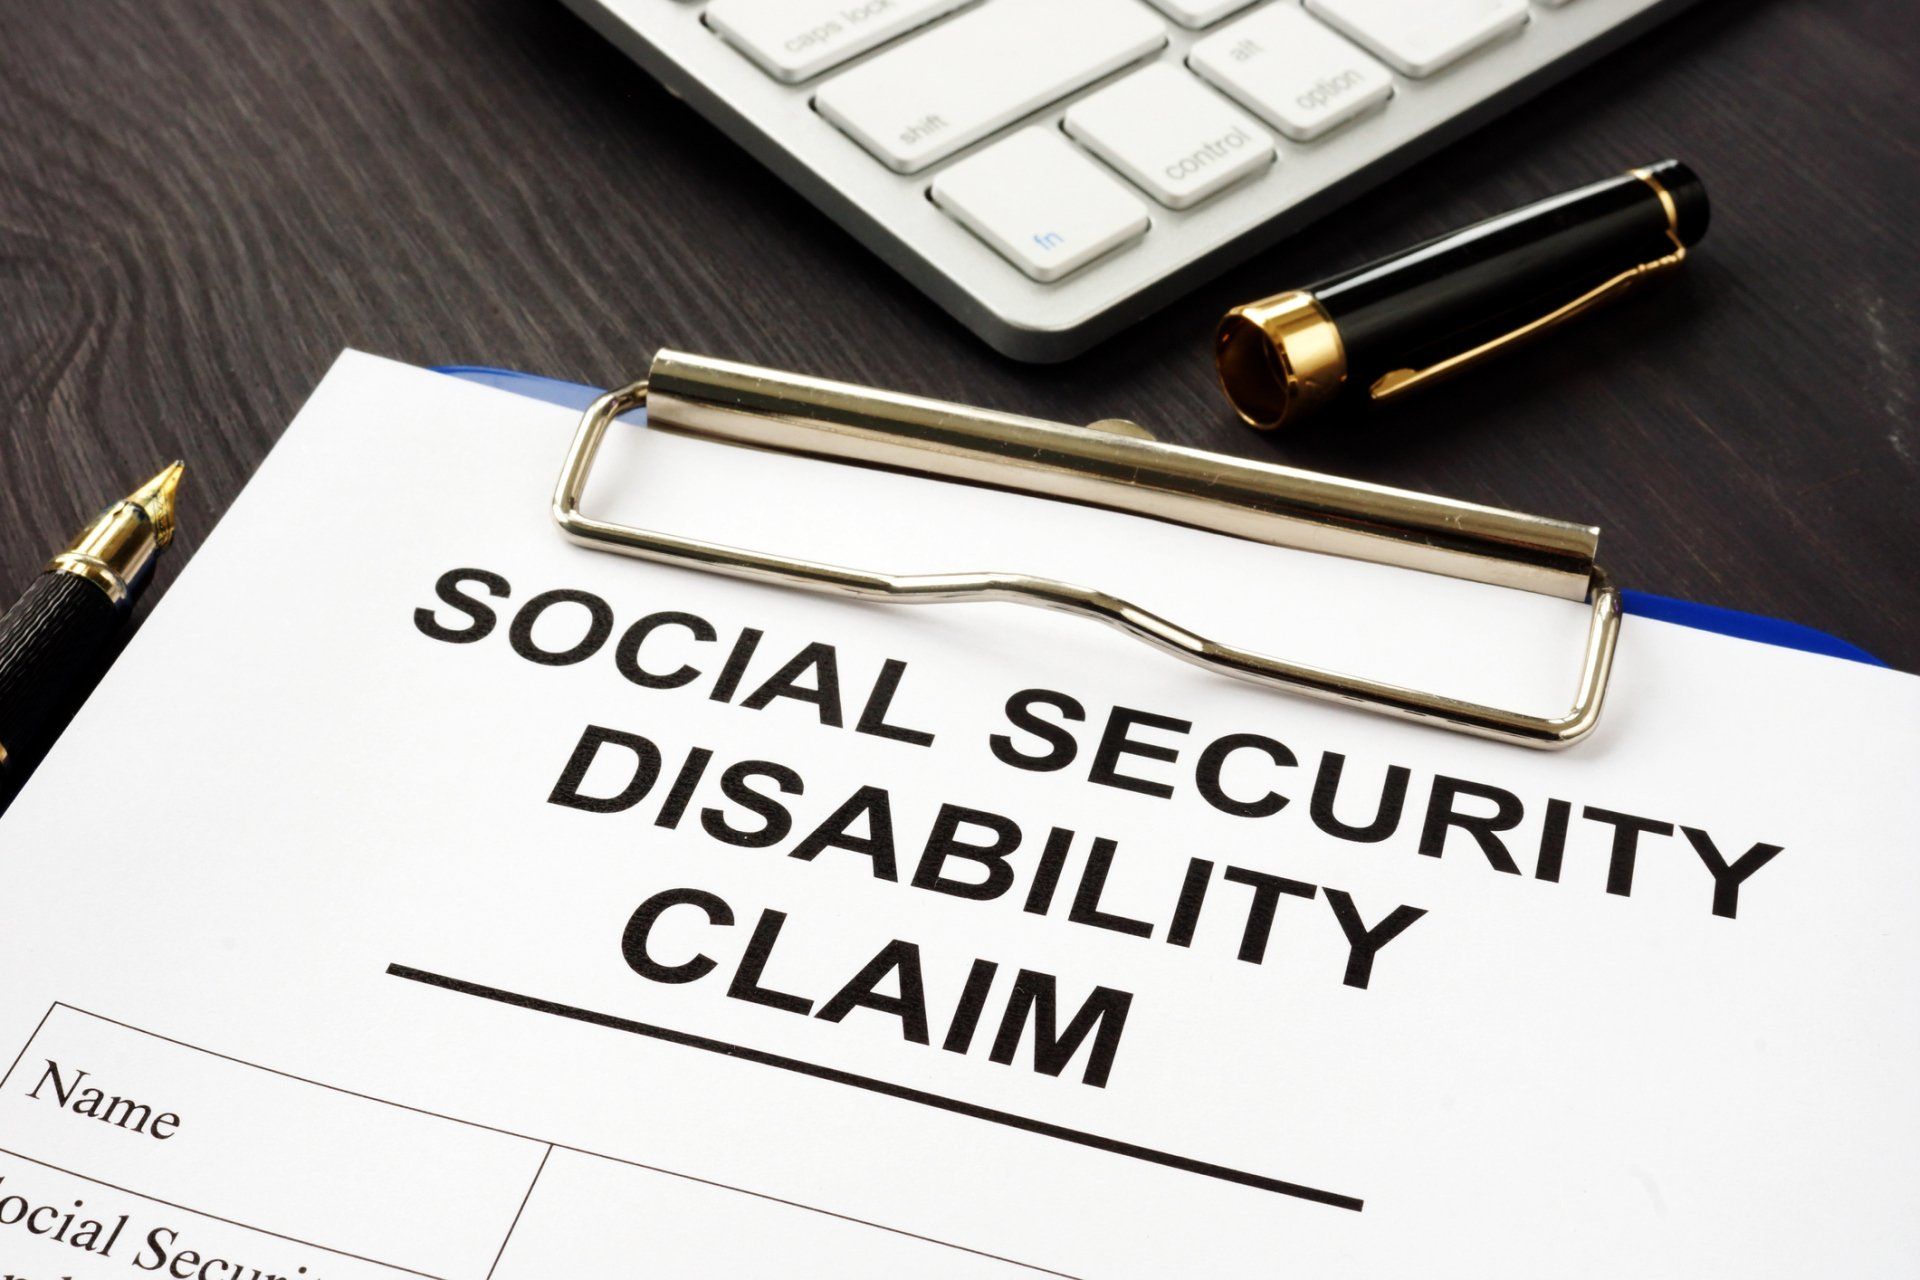 Social Security Disability Claim | Social security and disability lawyer serving Hamburg, NY